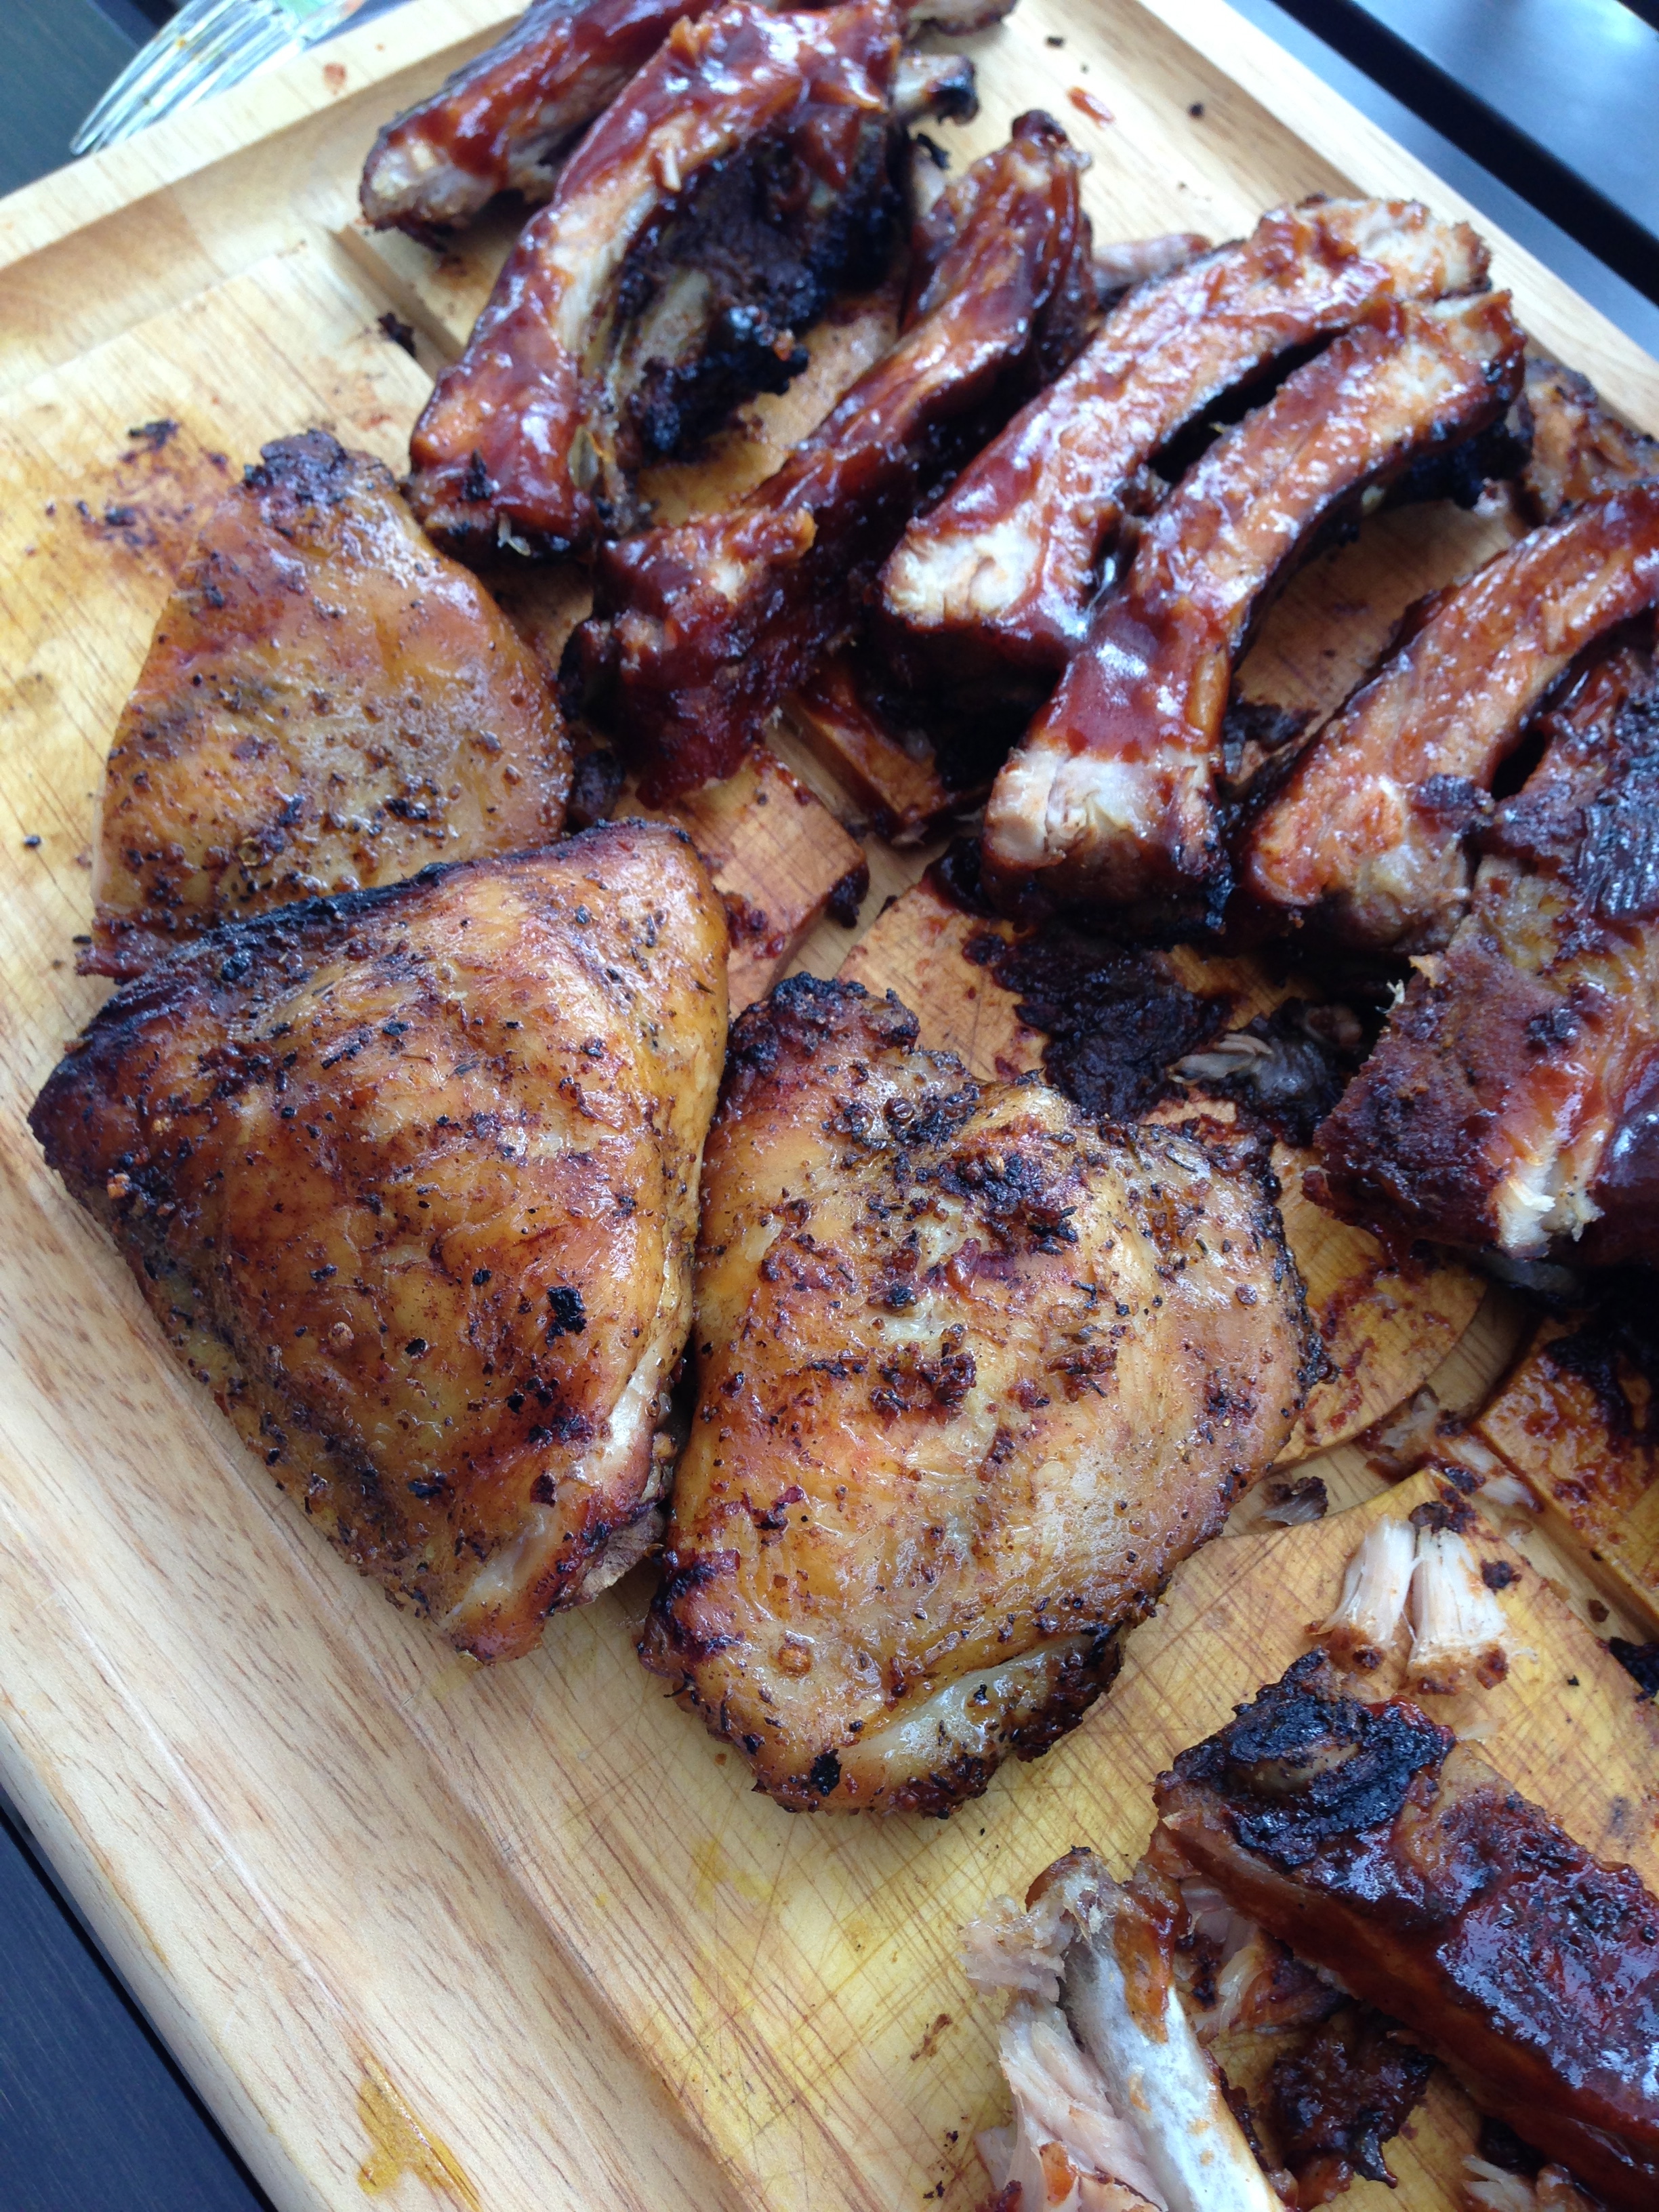 Smoked chicken and ribs.